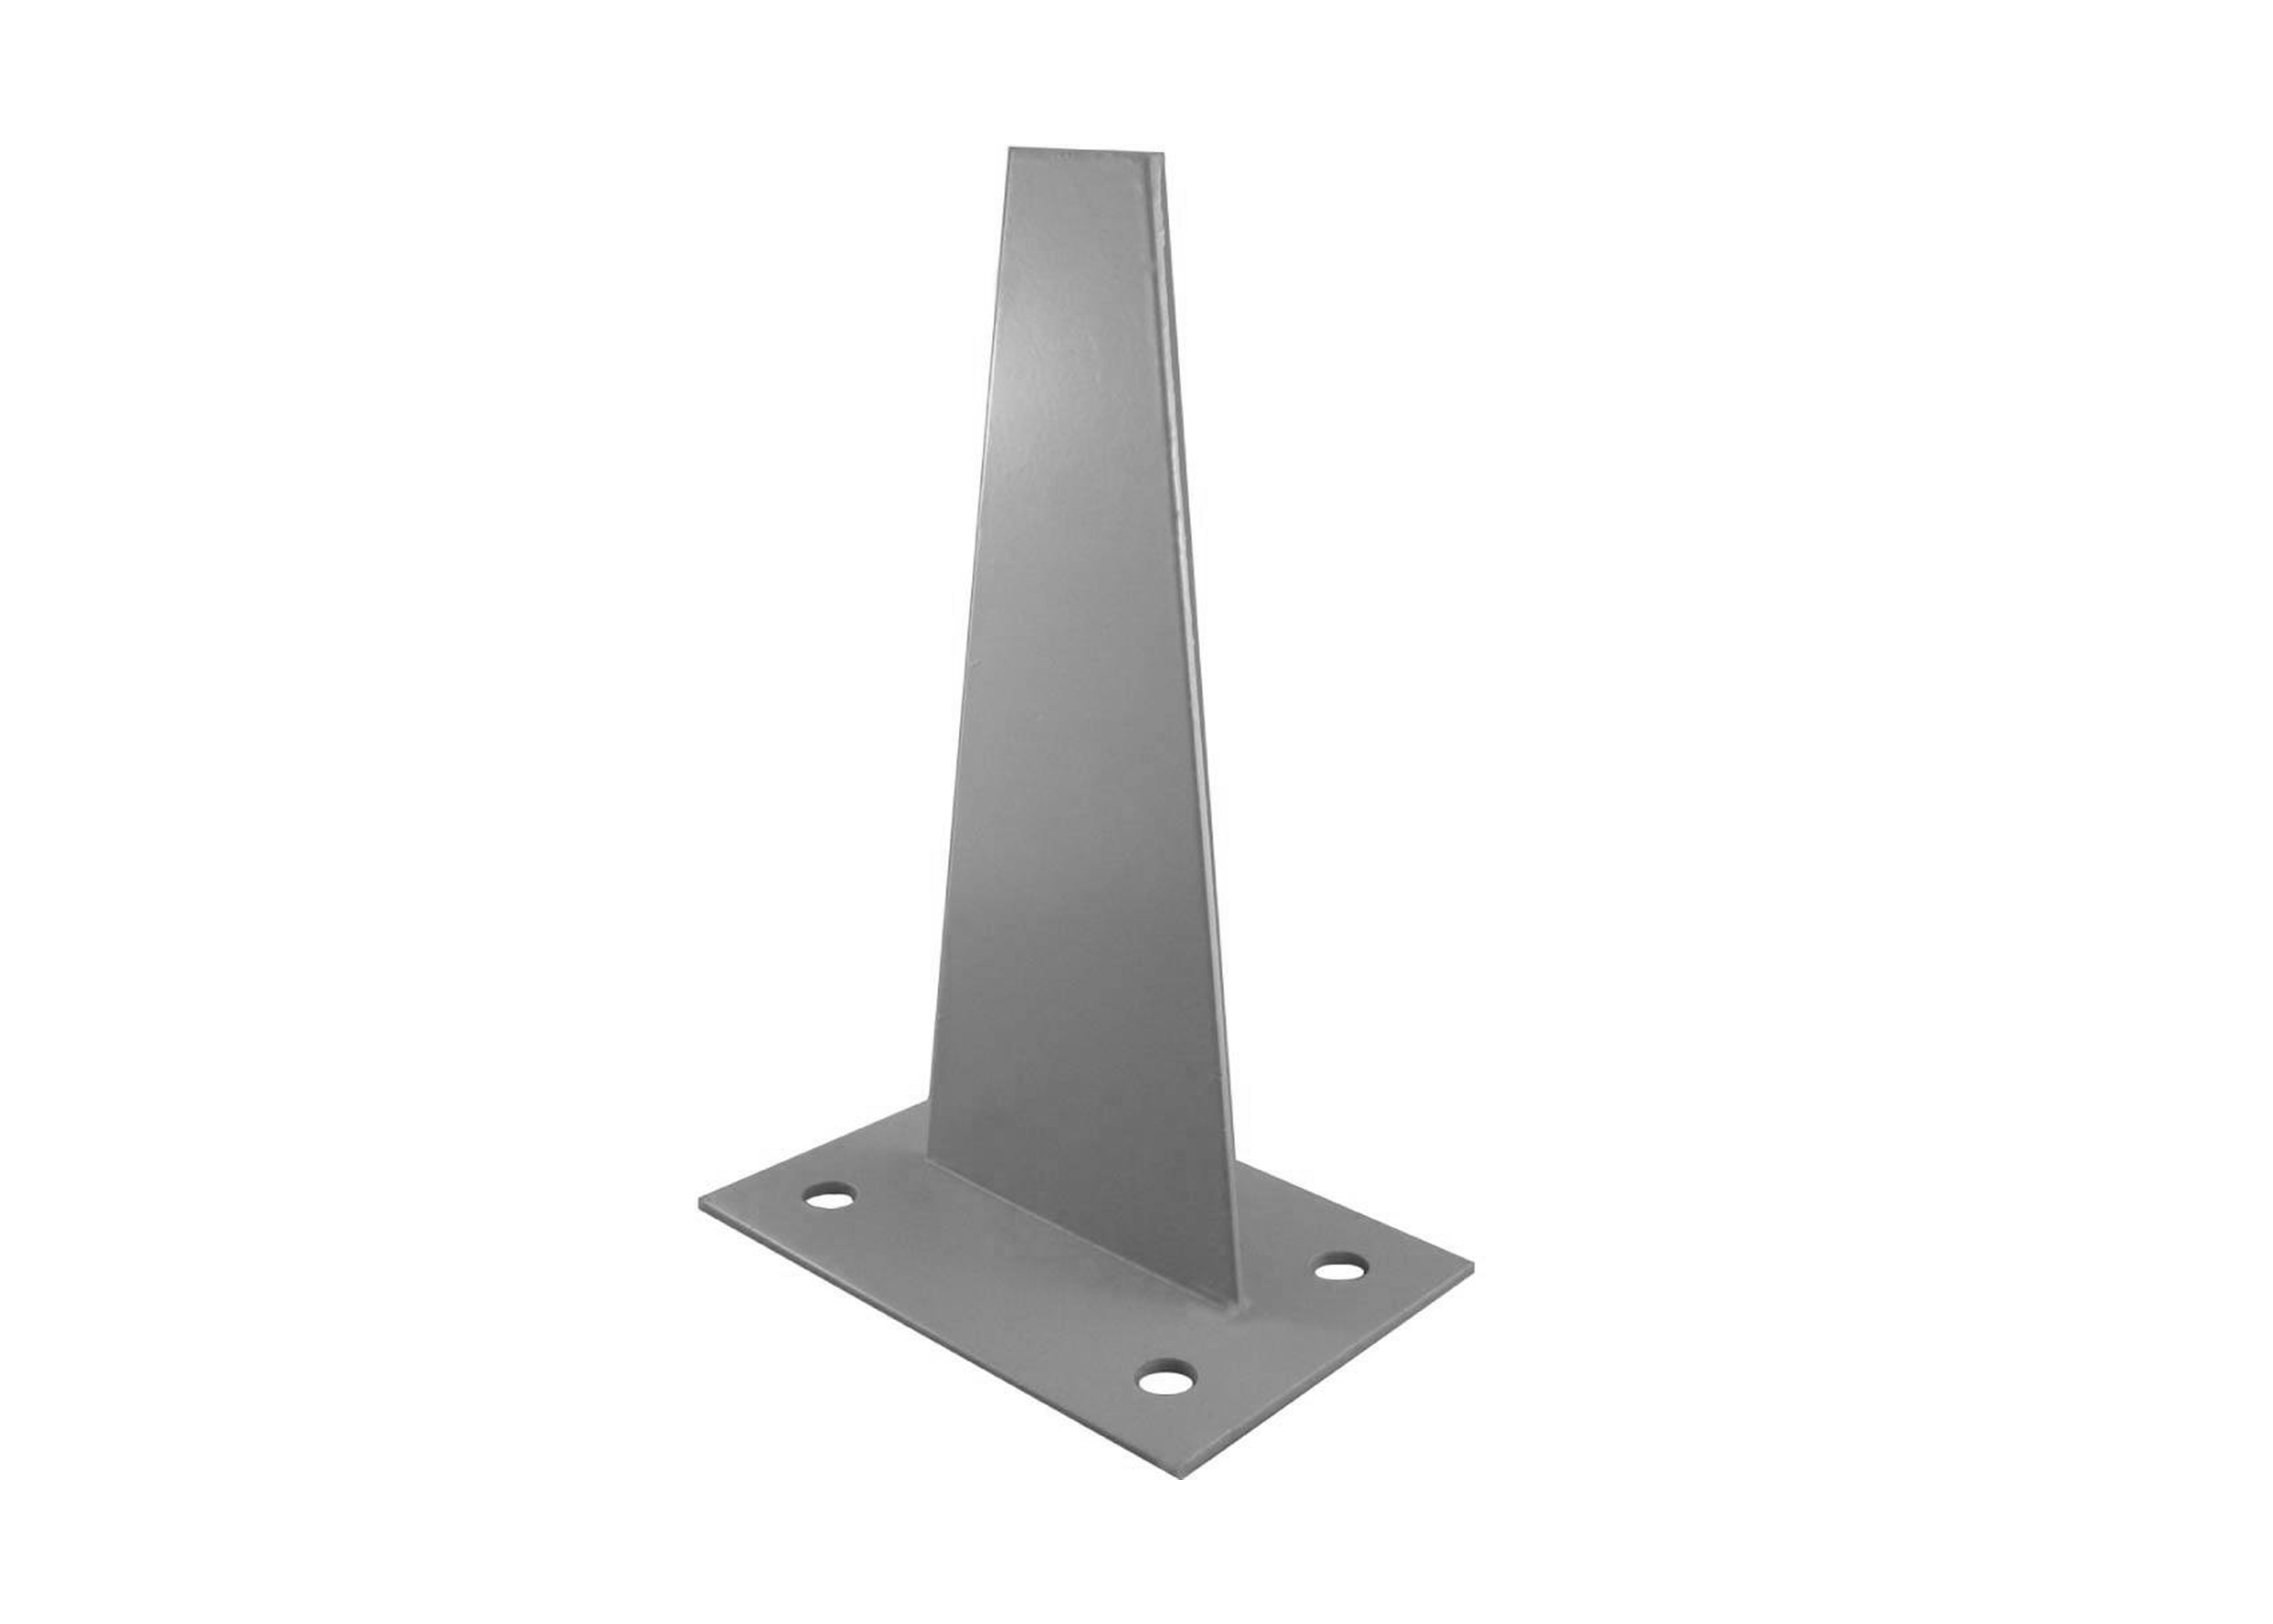 Shark fin style steel support bracket for fence